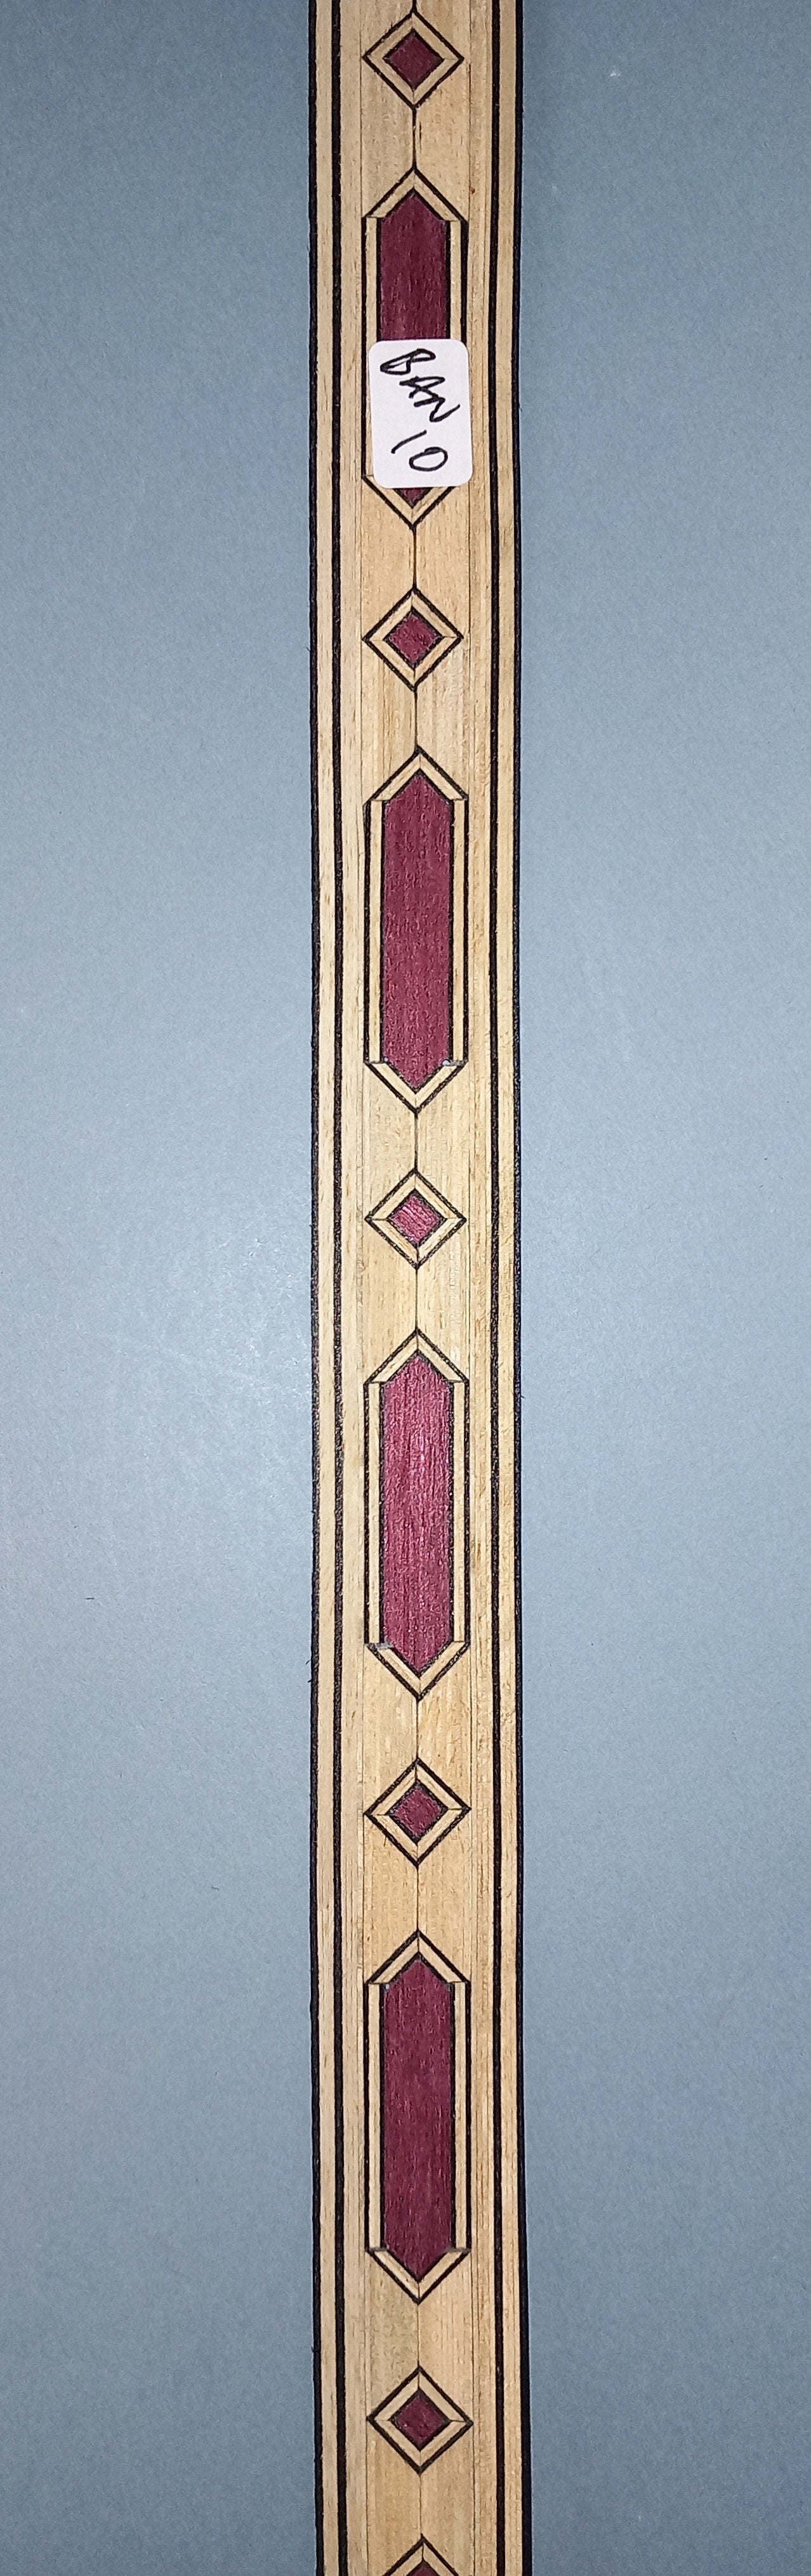 MARQUETRY INLAY BANDINGS 0.5MM THICK    25 X 100 CM